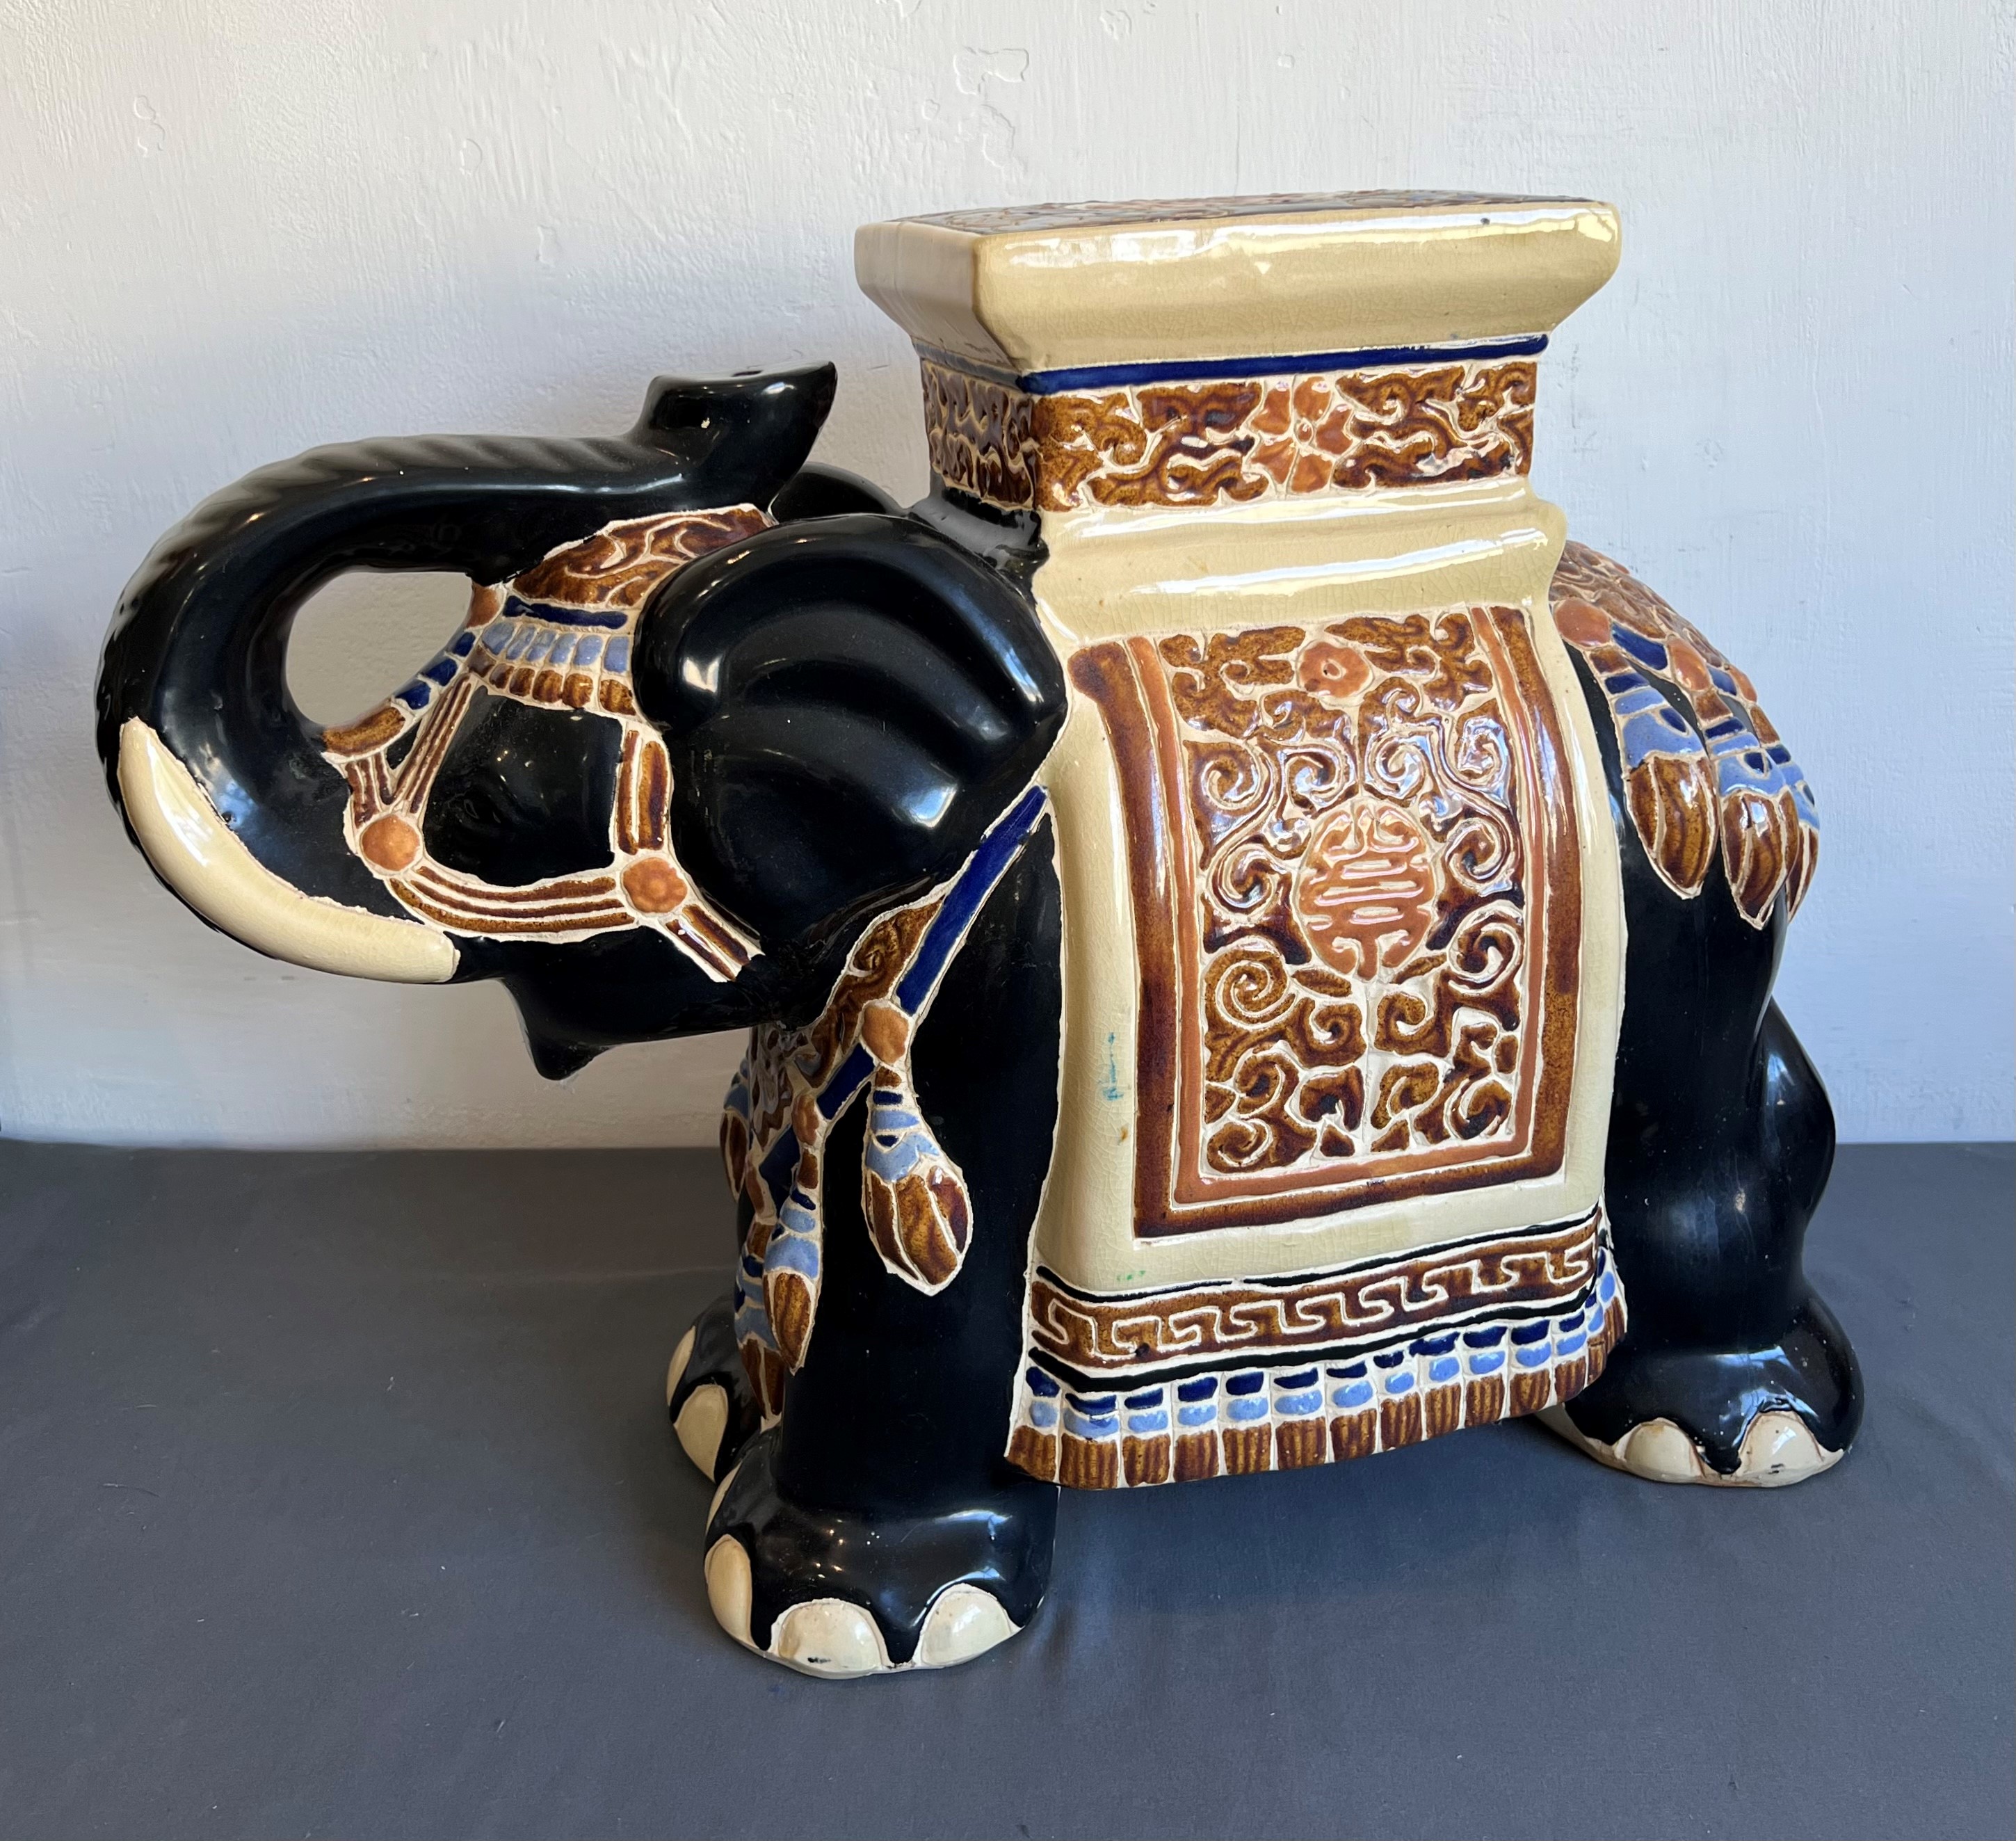 Three large pieces of Oriental pottery and porcelain - modern, comprising an earthenware elephant